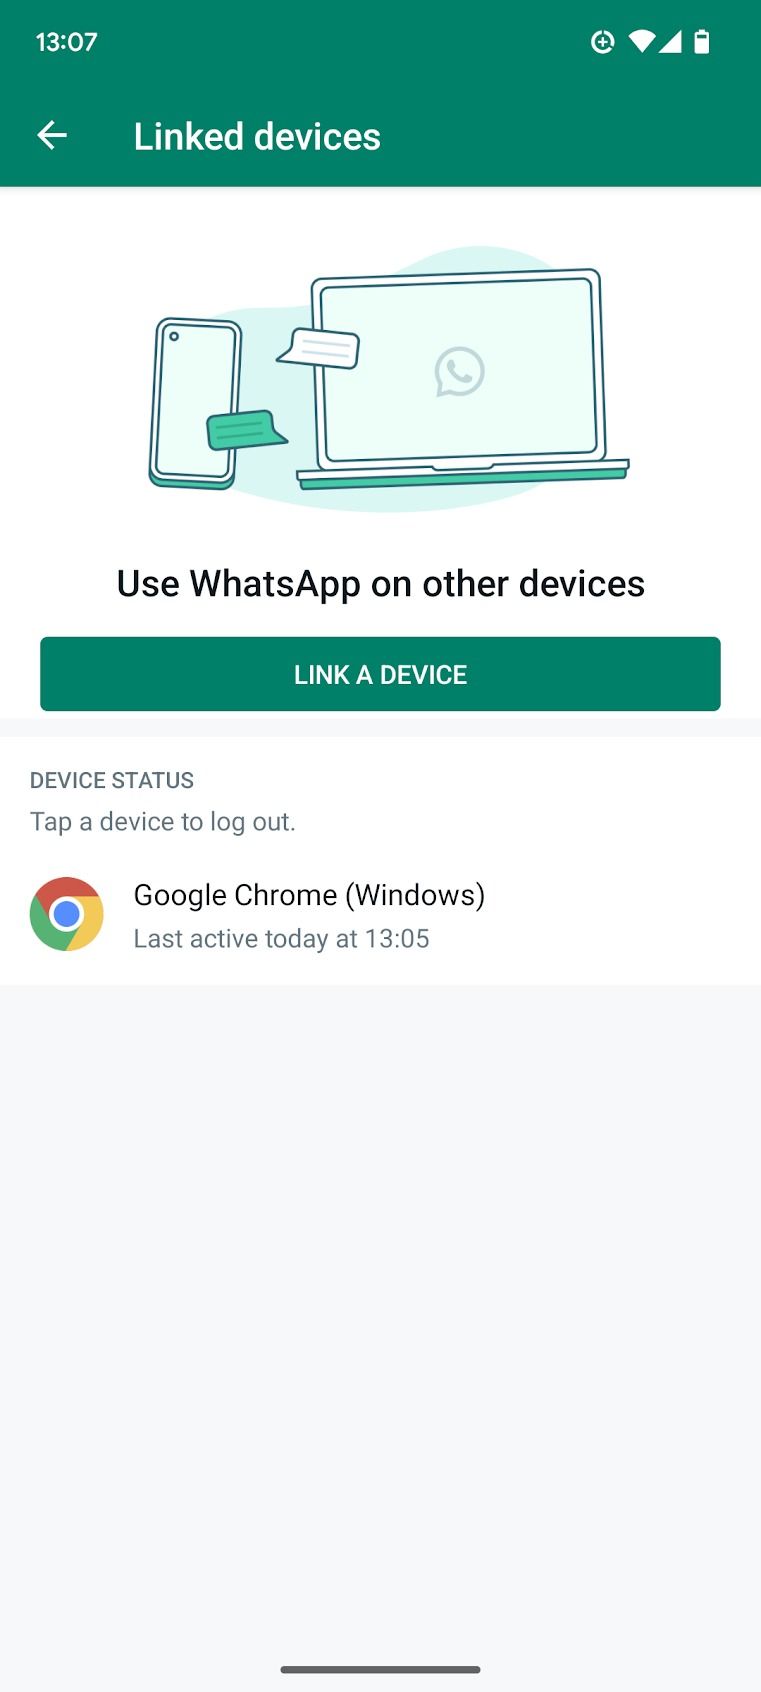 link a device on WhatsApp